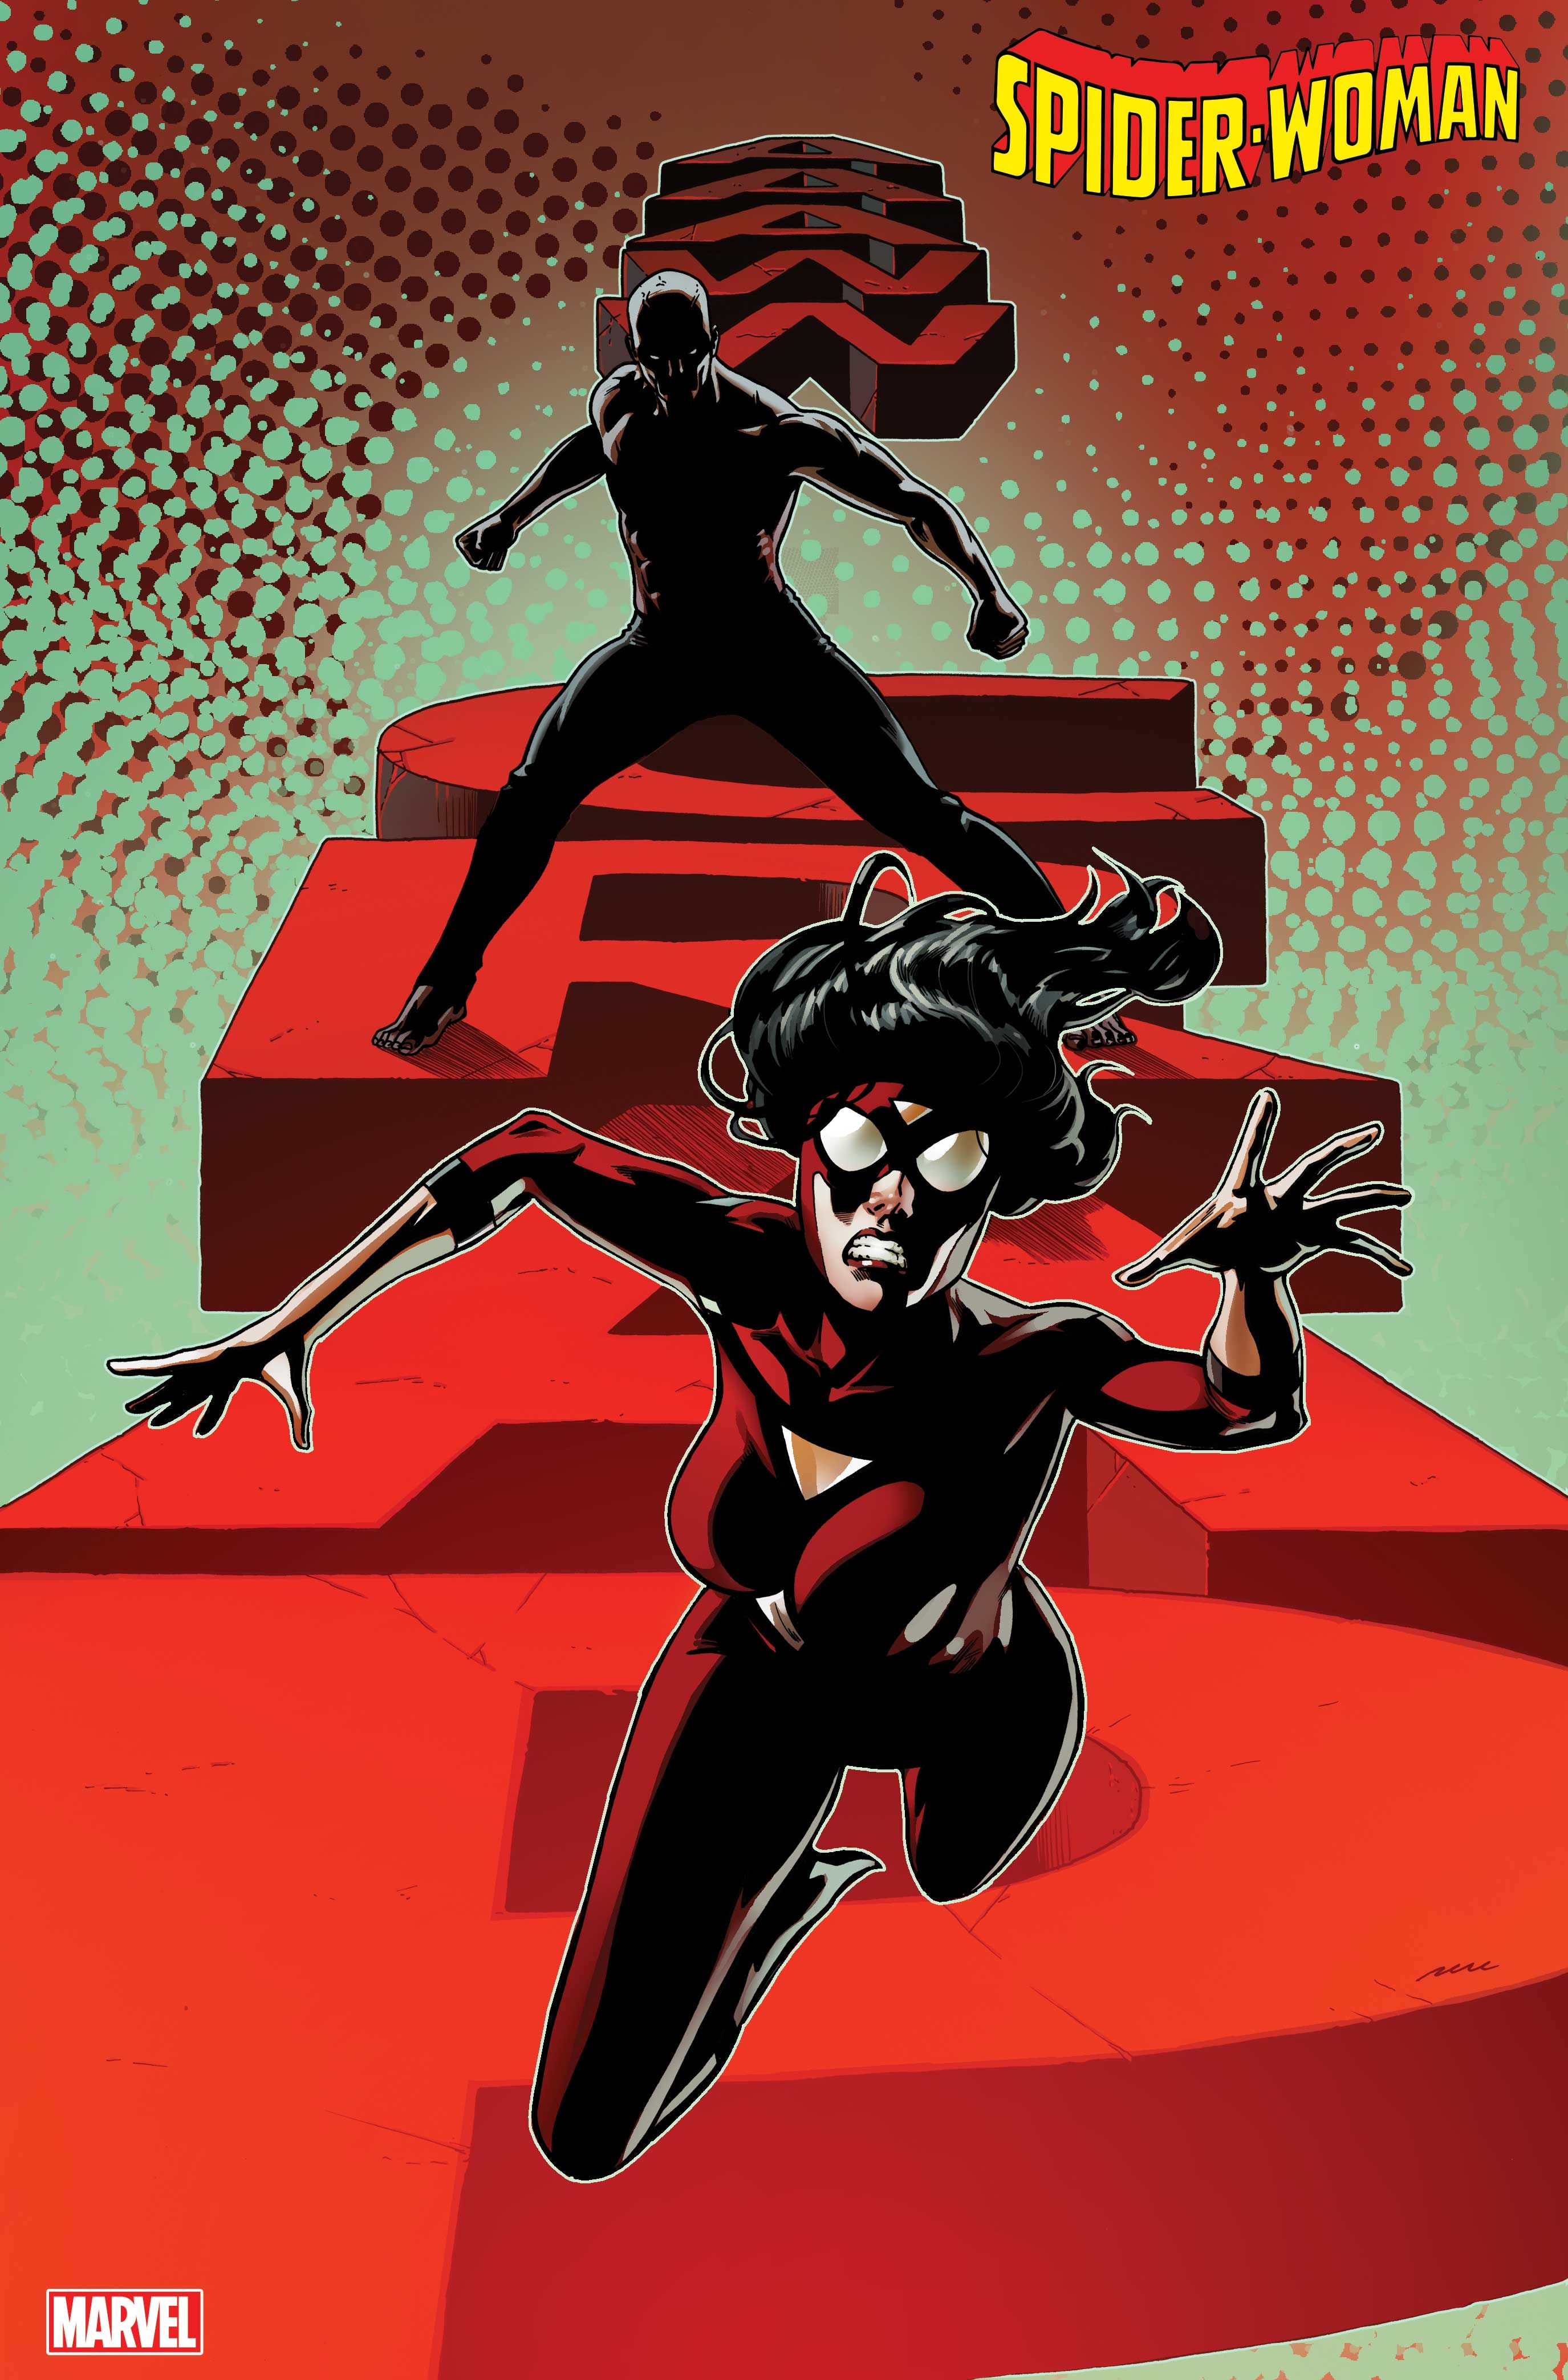 Spider-Woman #14 cover